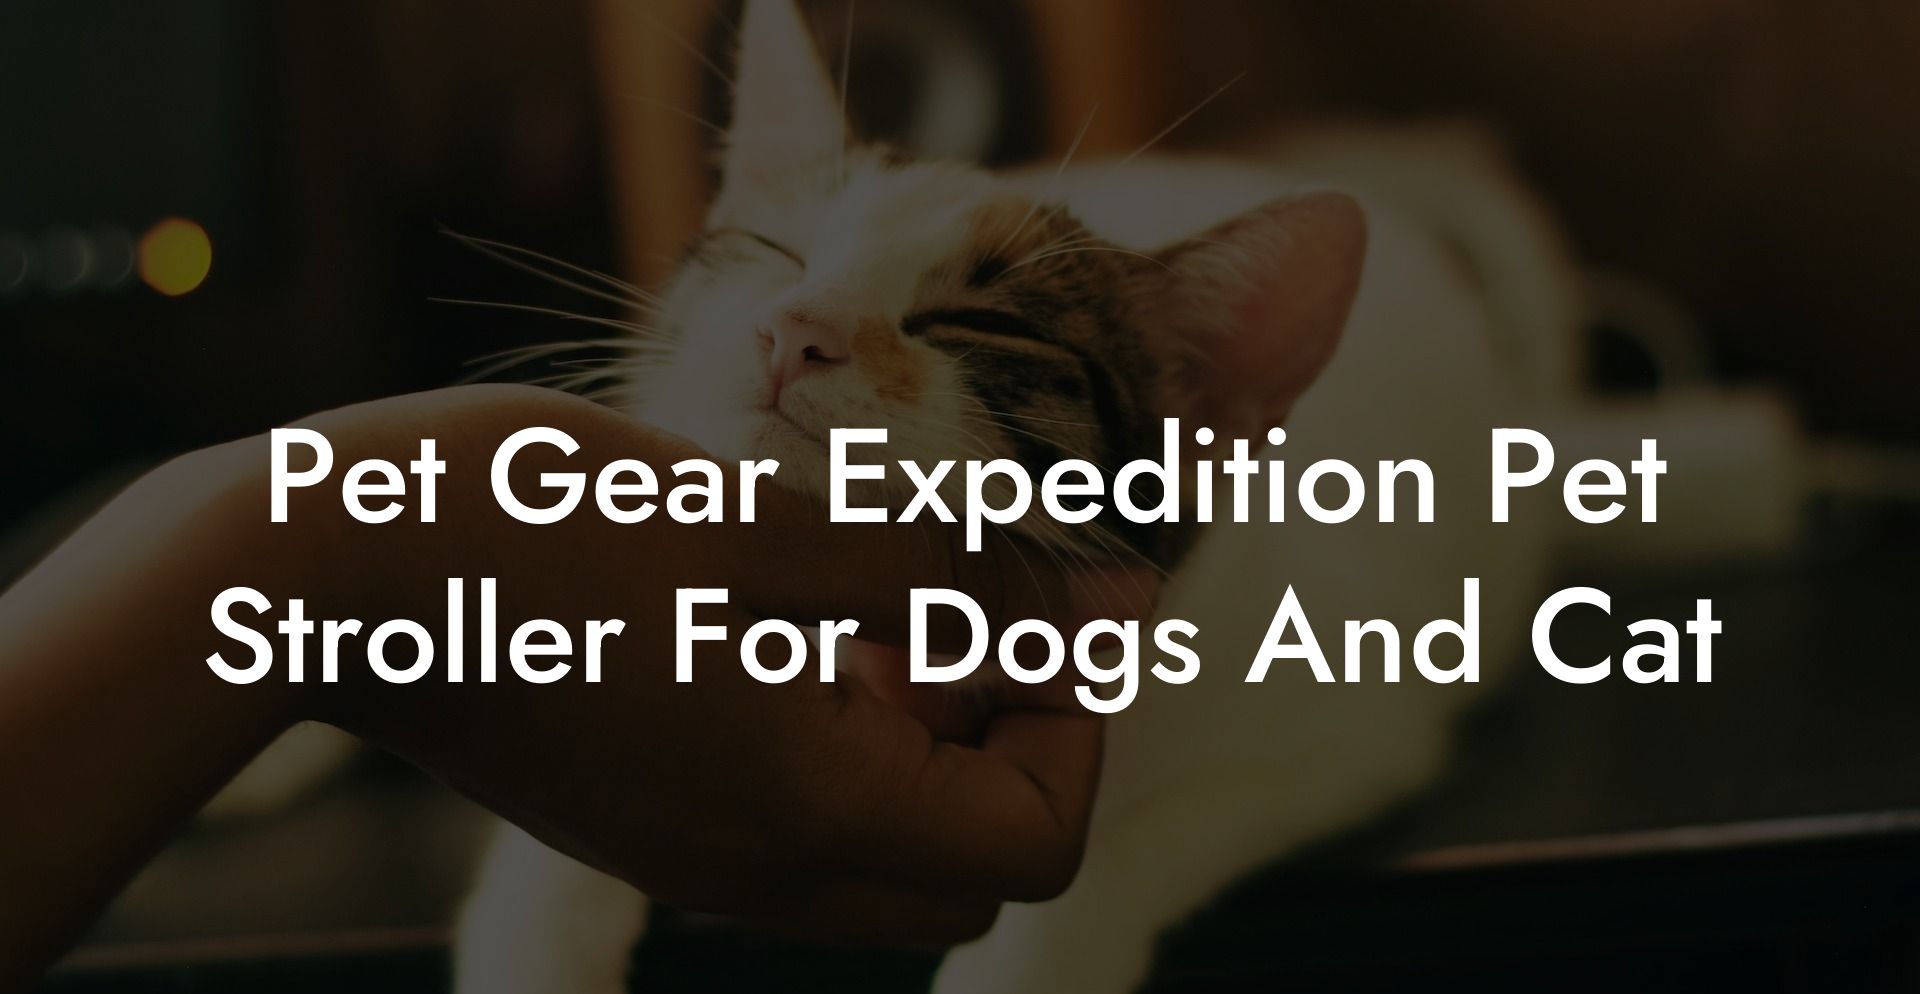 Pet Gear Expedition Pet Stroller For Dogs And Cat